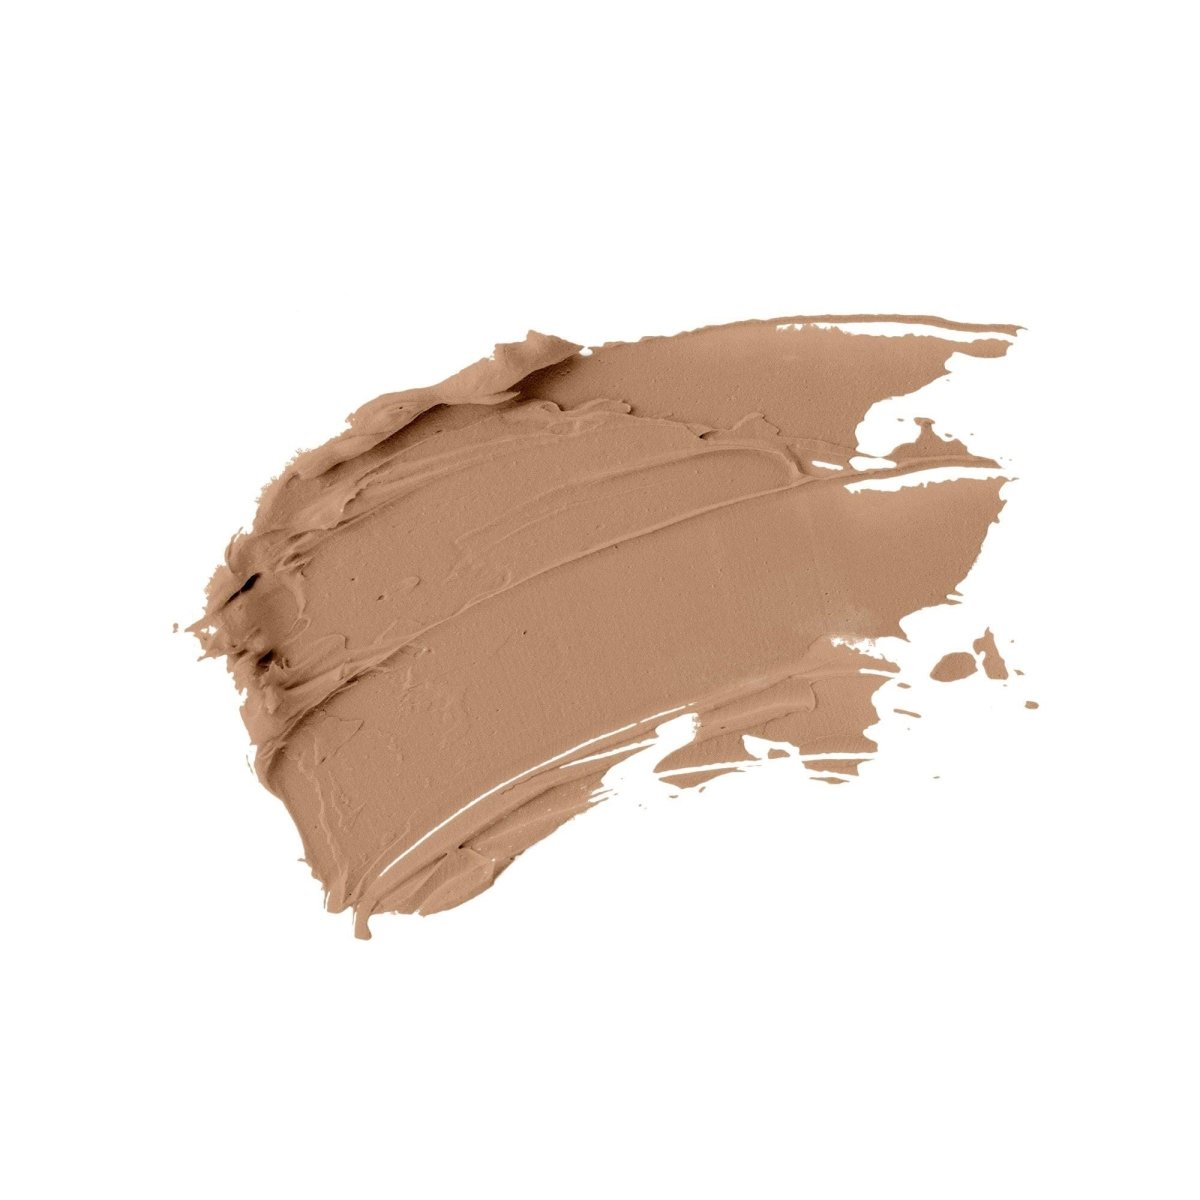 swatch of light ivory natural liquid foundation on a white background